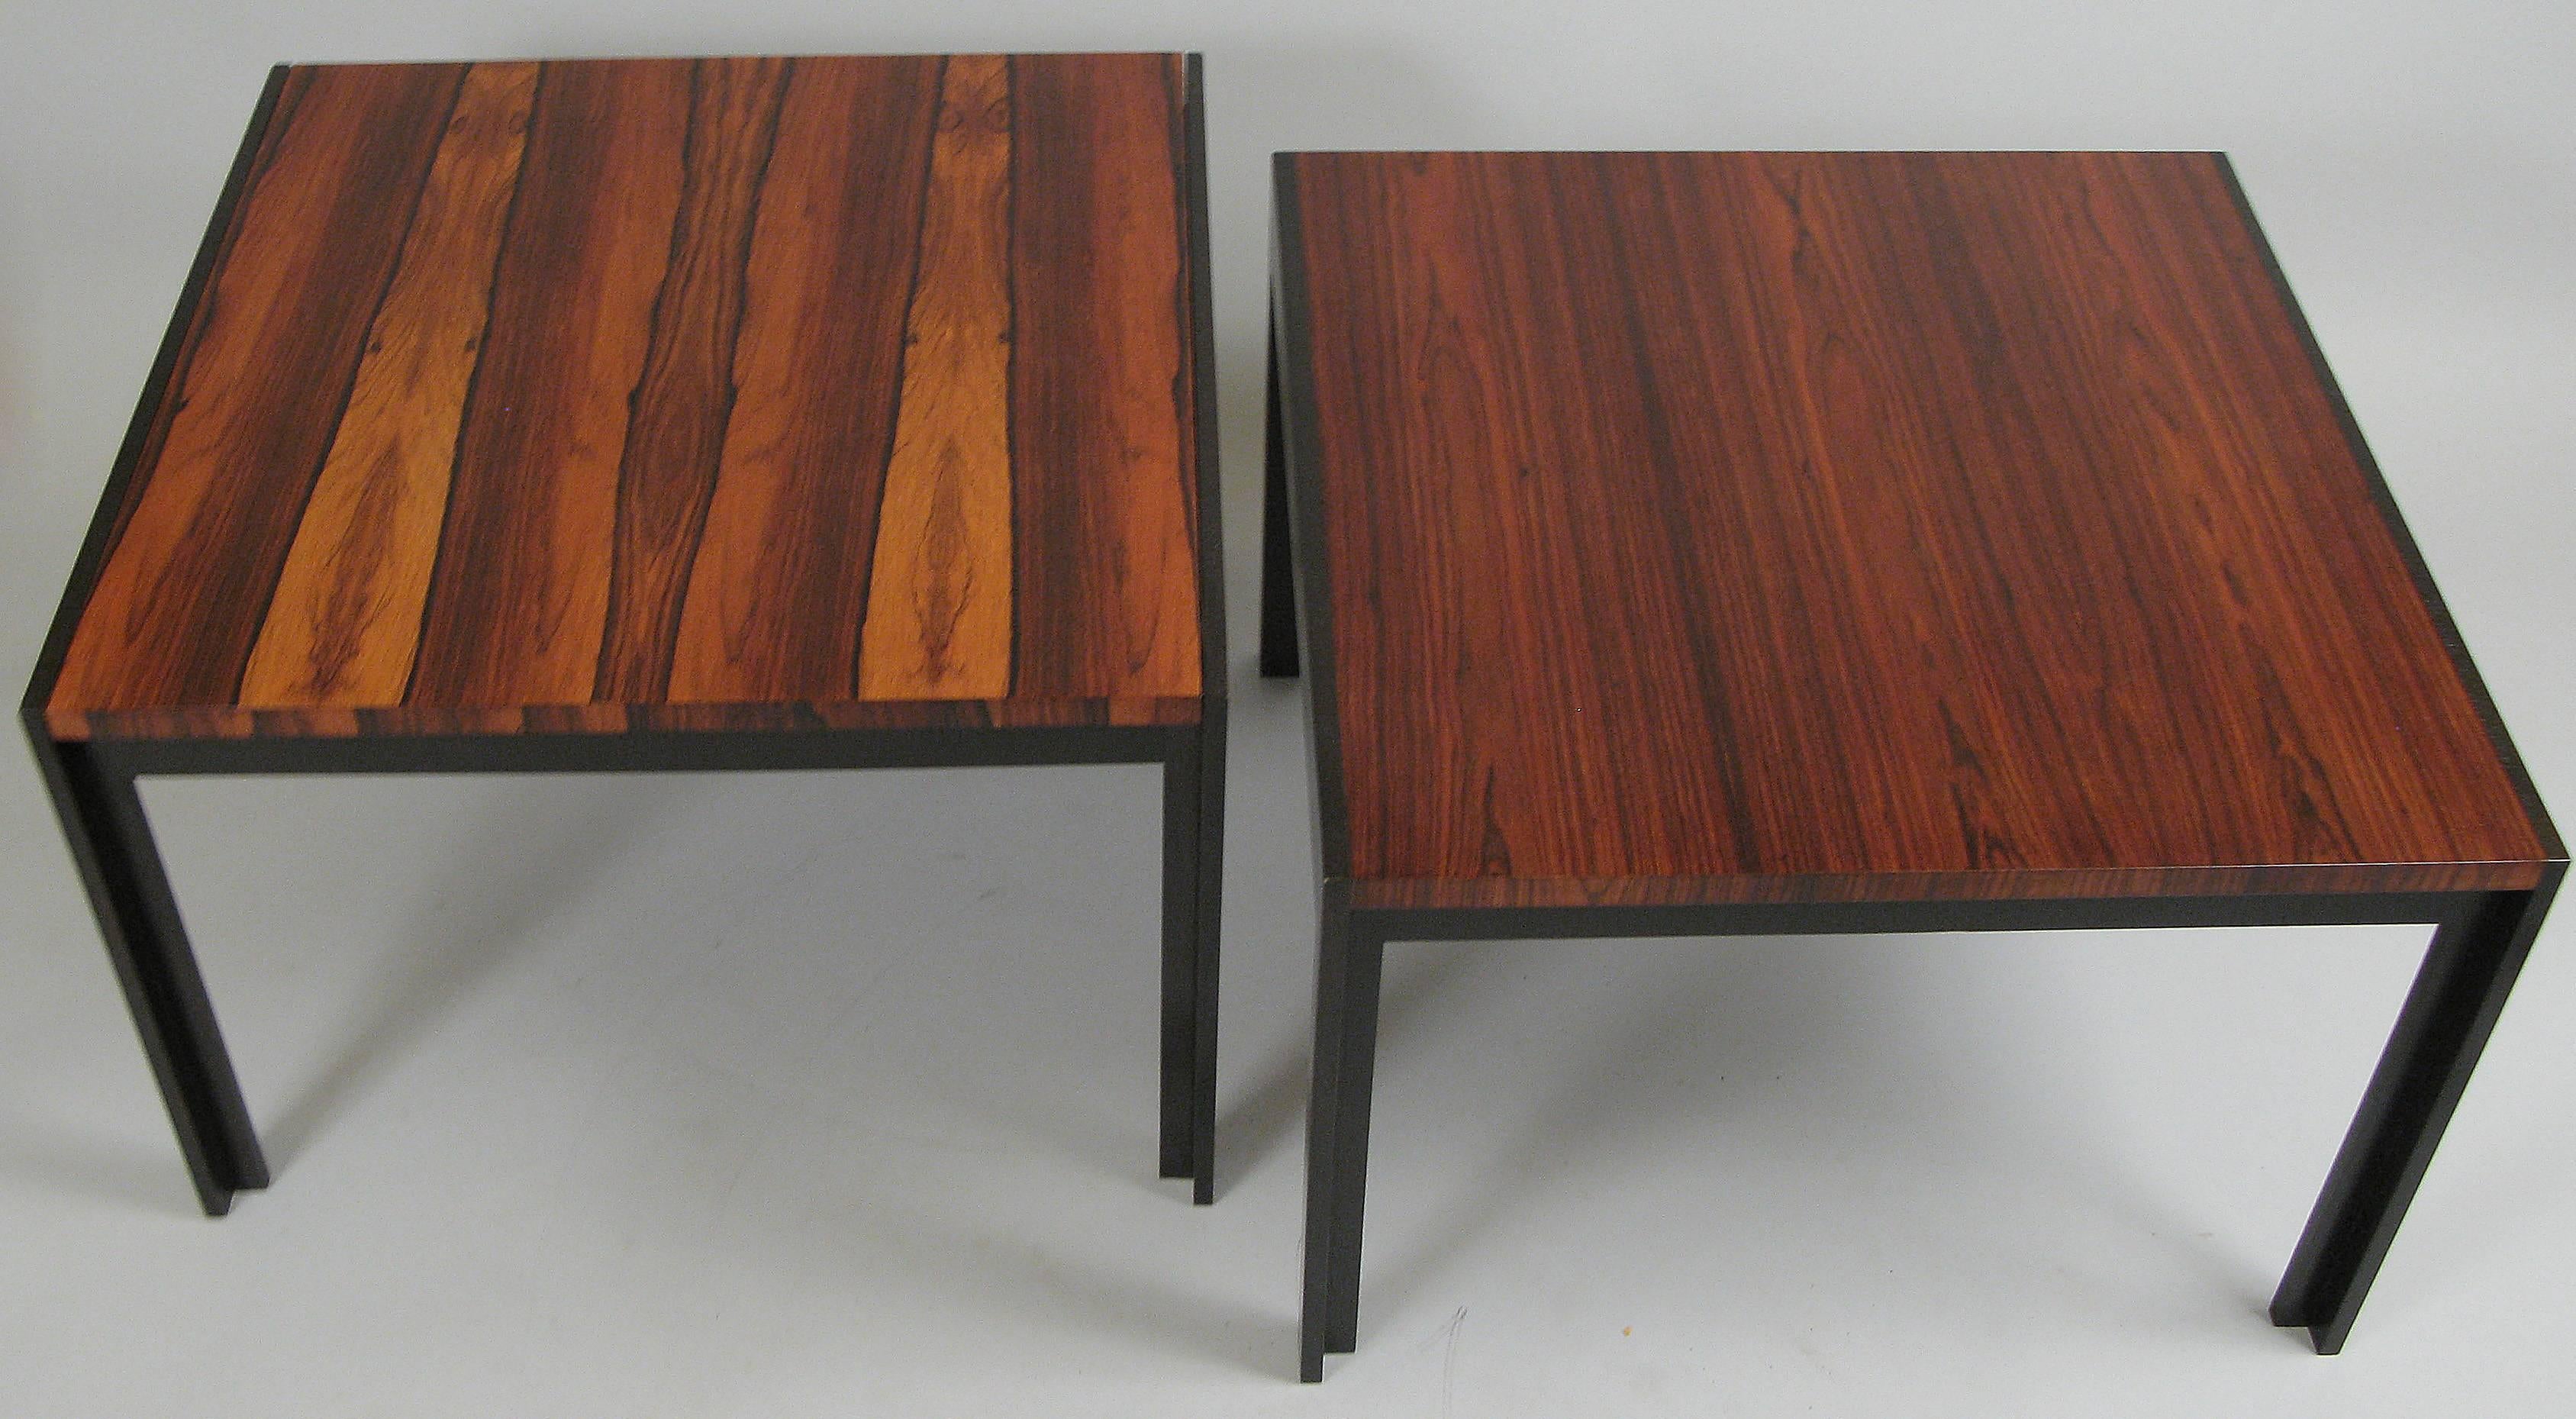 A pair of beautiful vintage large square 1960s modern lamp tables by Baker Furniture, with ebonized mahogany frames and gorgeous solid rosewood tops. Very nice L-shaped legs.